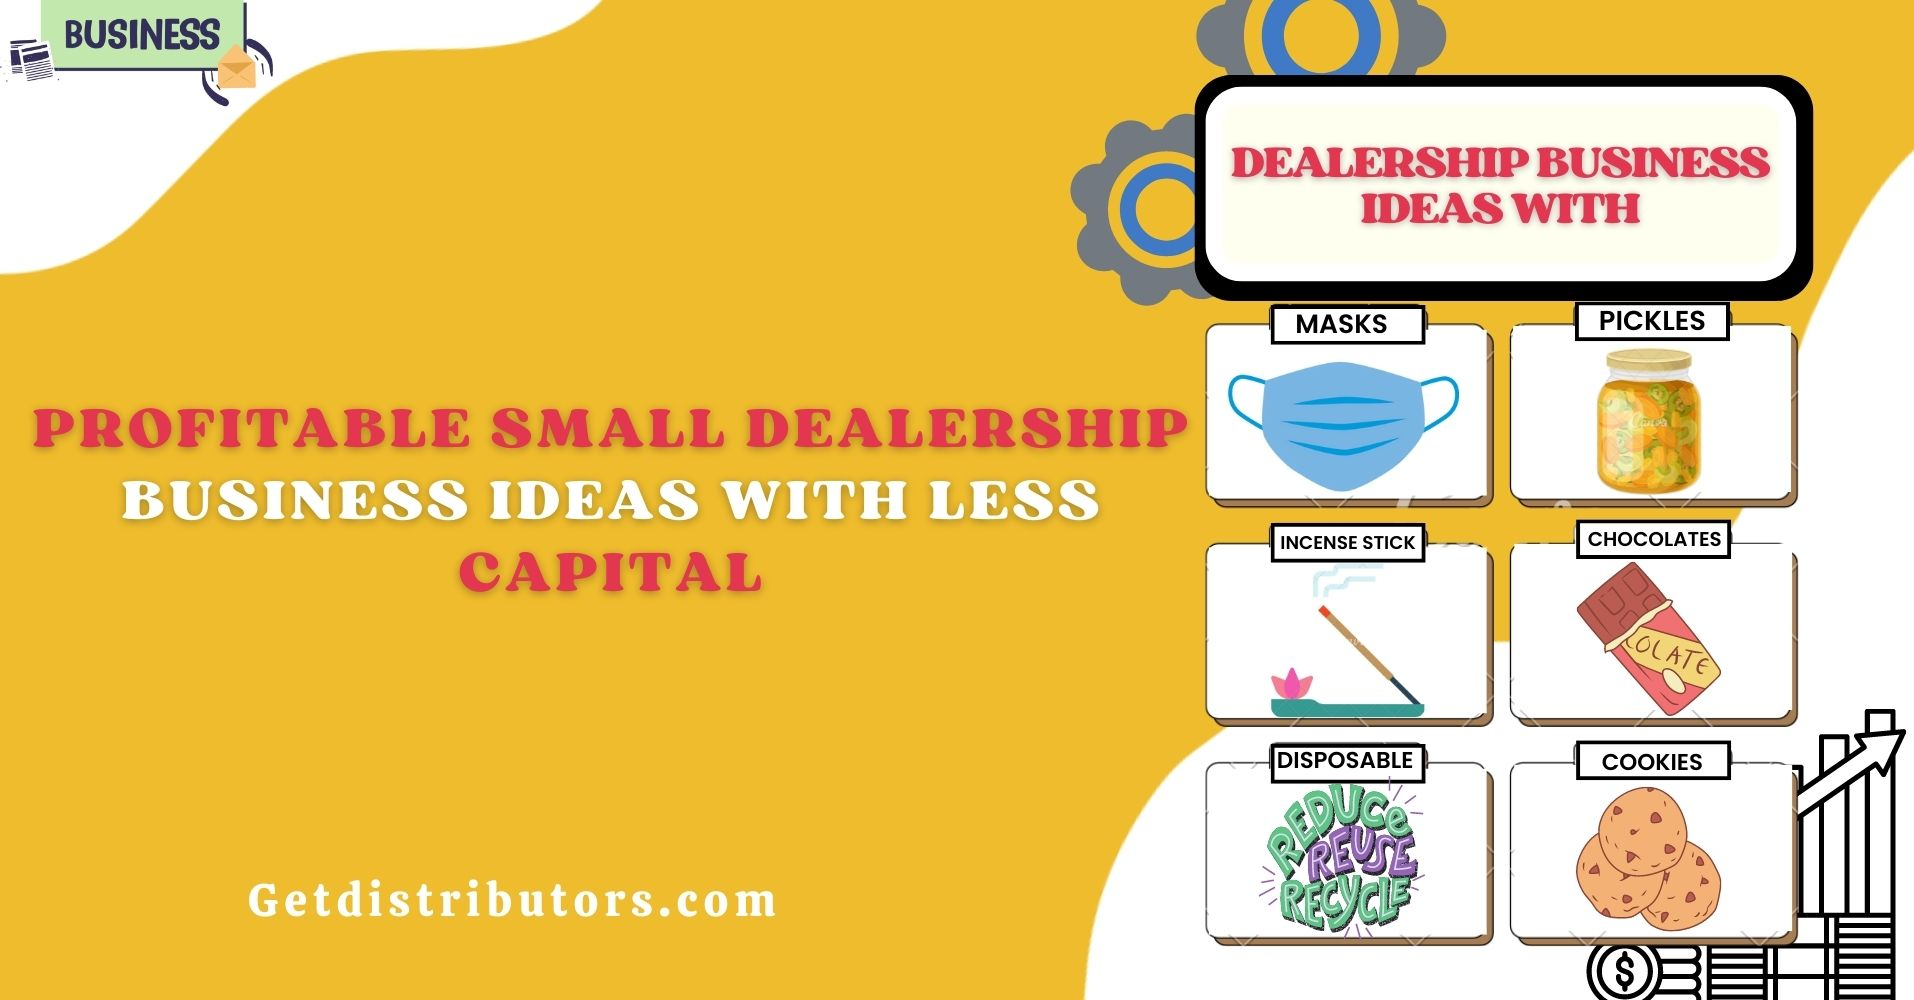 Profitable small dealership business ideas with less capital